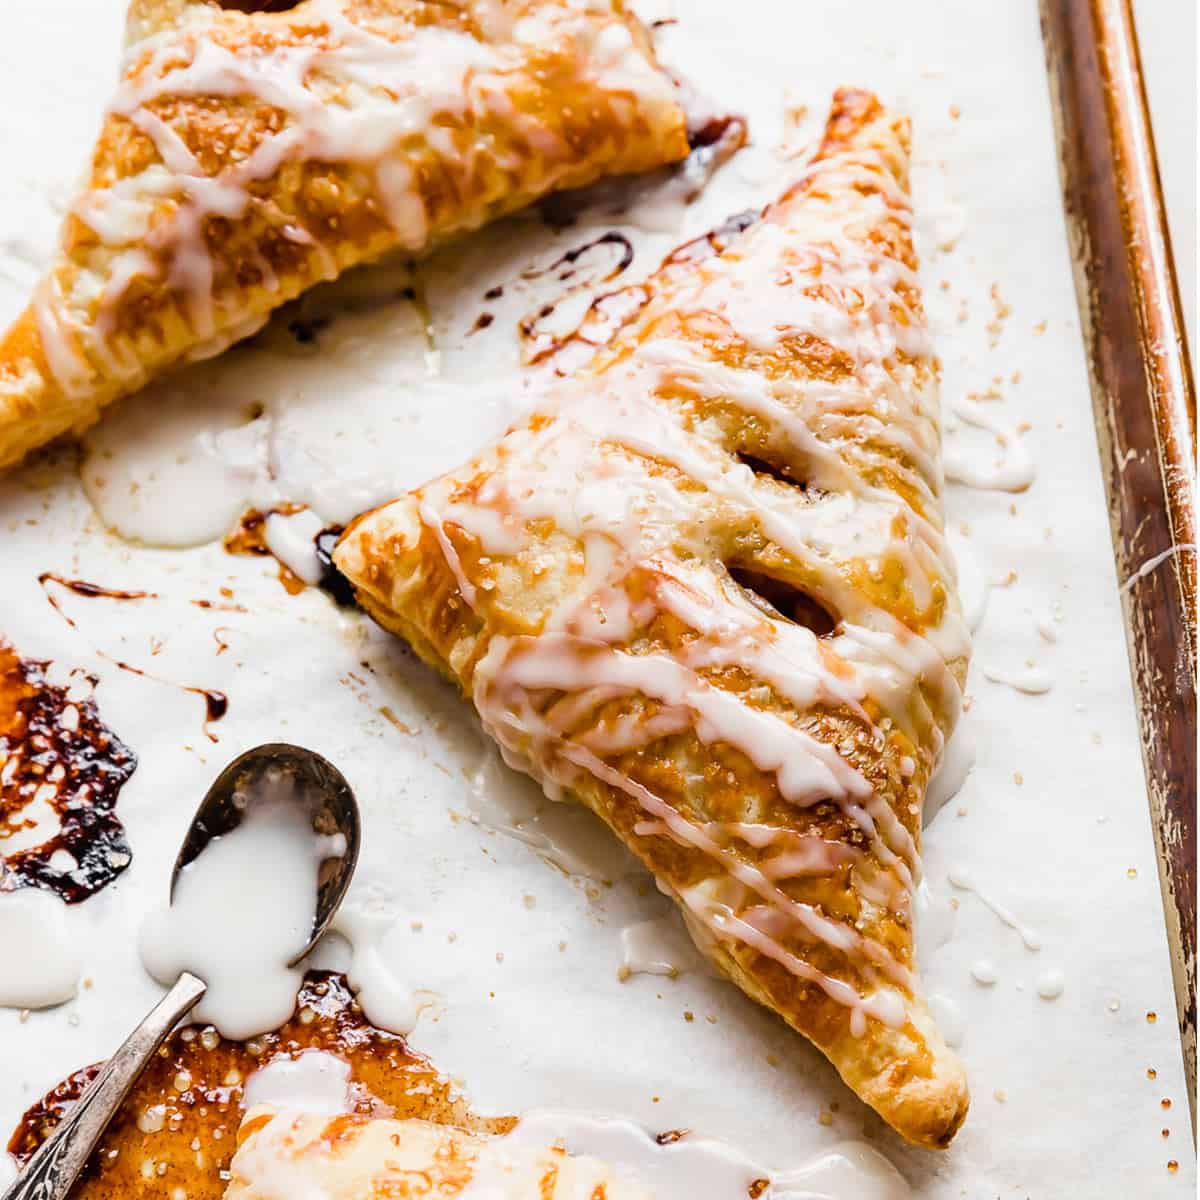 A glazed Puff Pastry Apple Turnover on a white parchment paper.